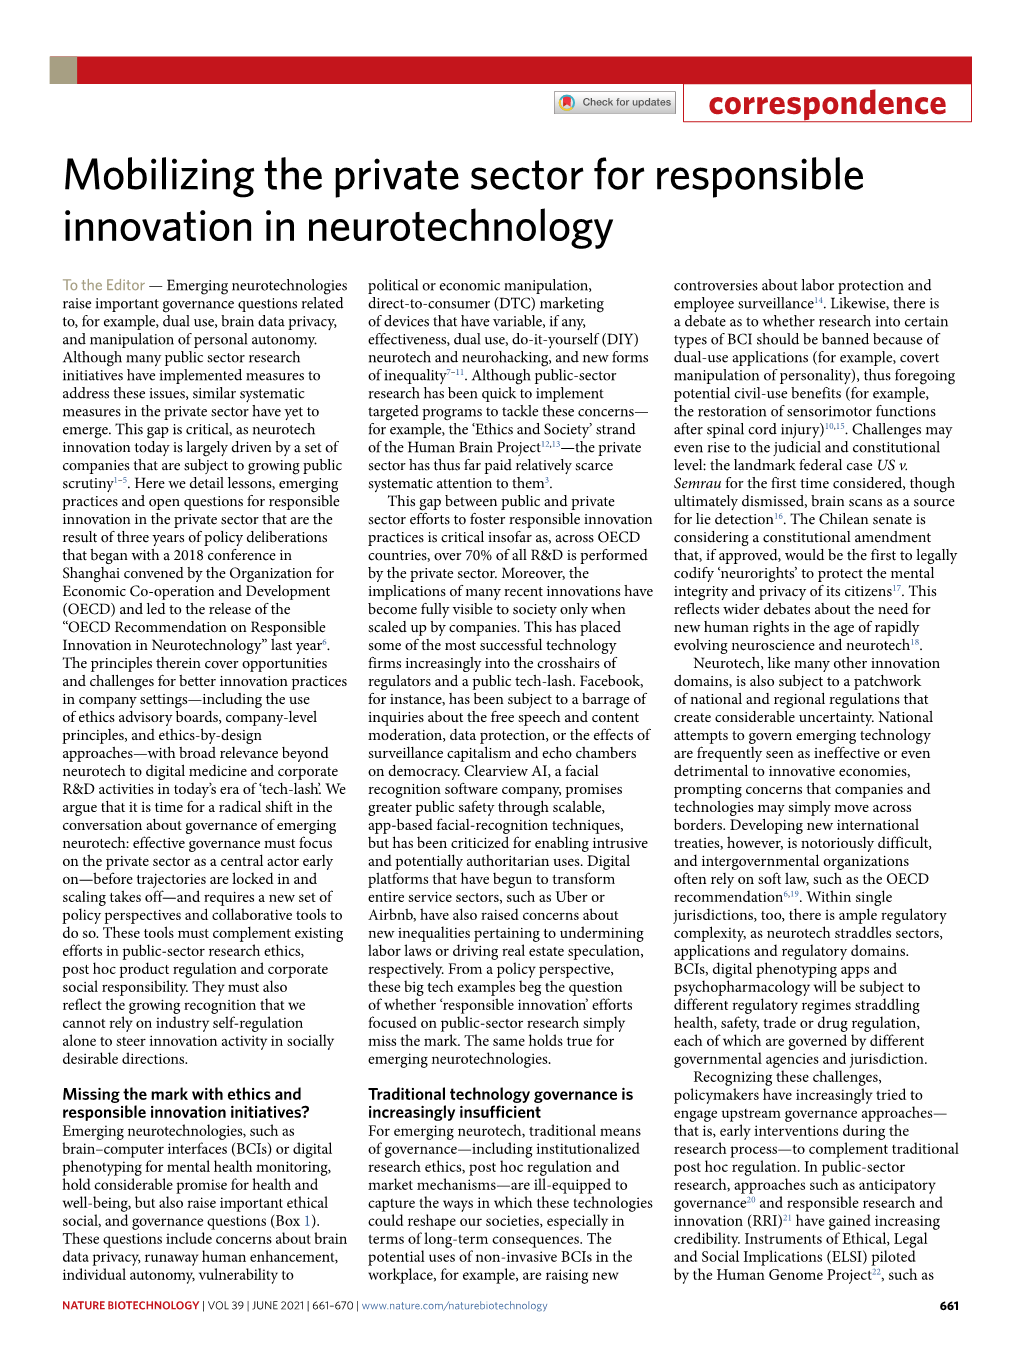 Mobilizing the Private Sector for Responsible Innovation in Neurotechnology